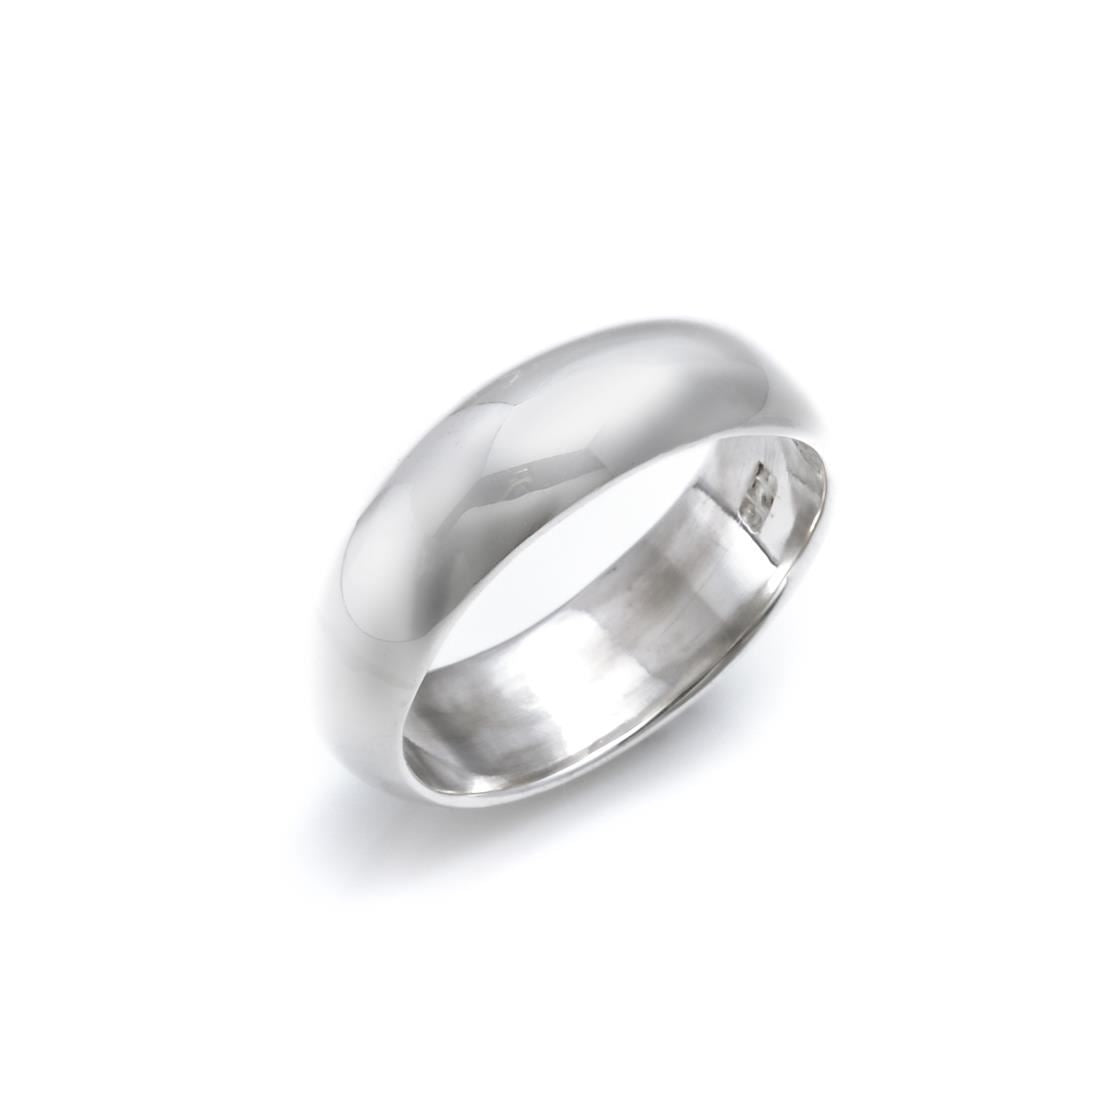 Sterling Silver Unisex Wedding Band Ring - Silverly